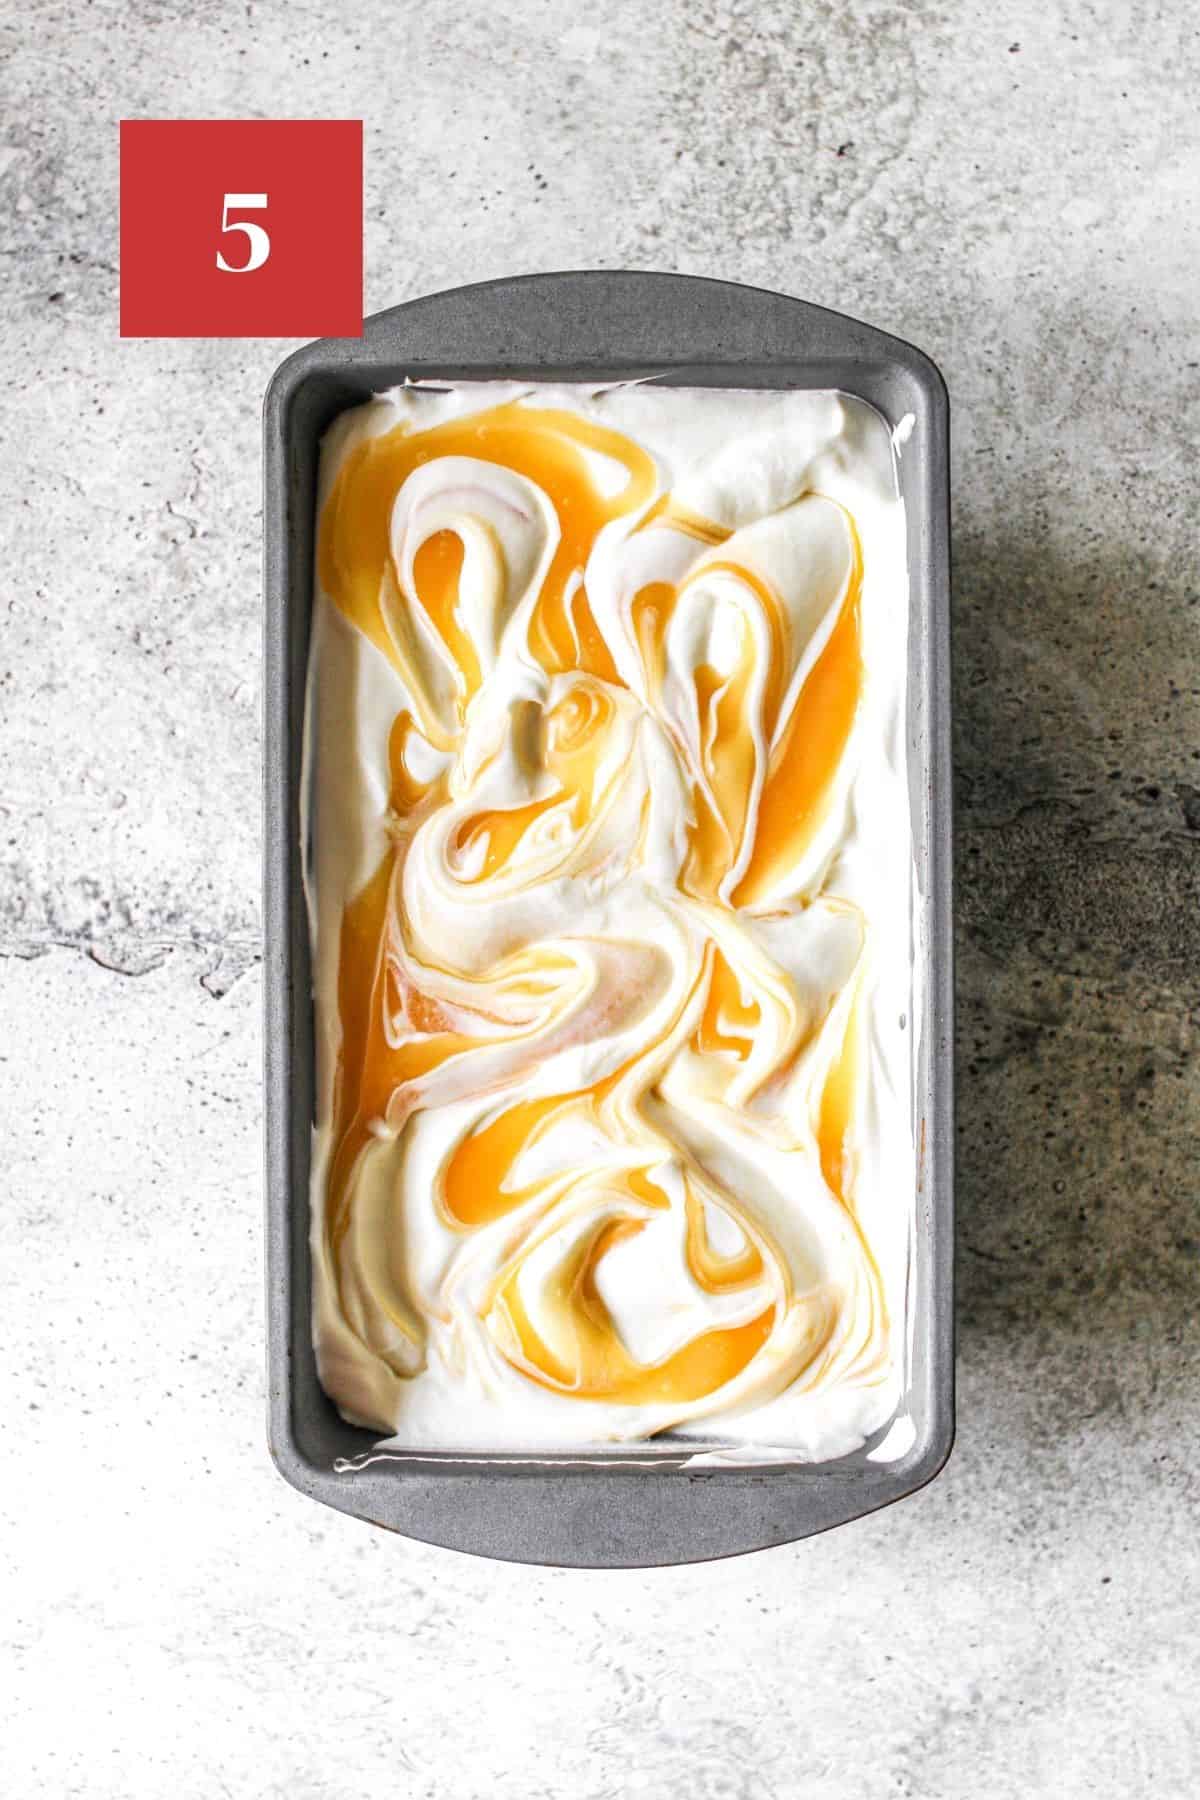 No Churn Lemon Ice Cream in a metal tin on a stone background. The ice cream has swirls of lemon curd.  In the upper left corner is a dark red square with a white '5' in the center.